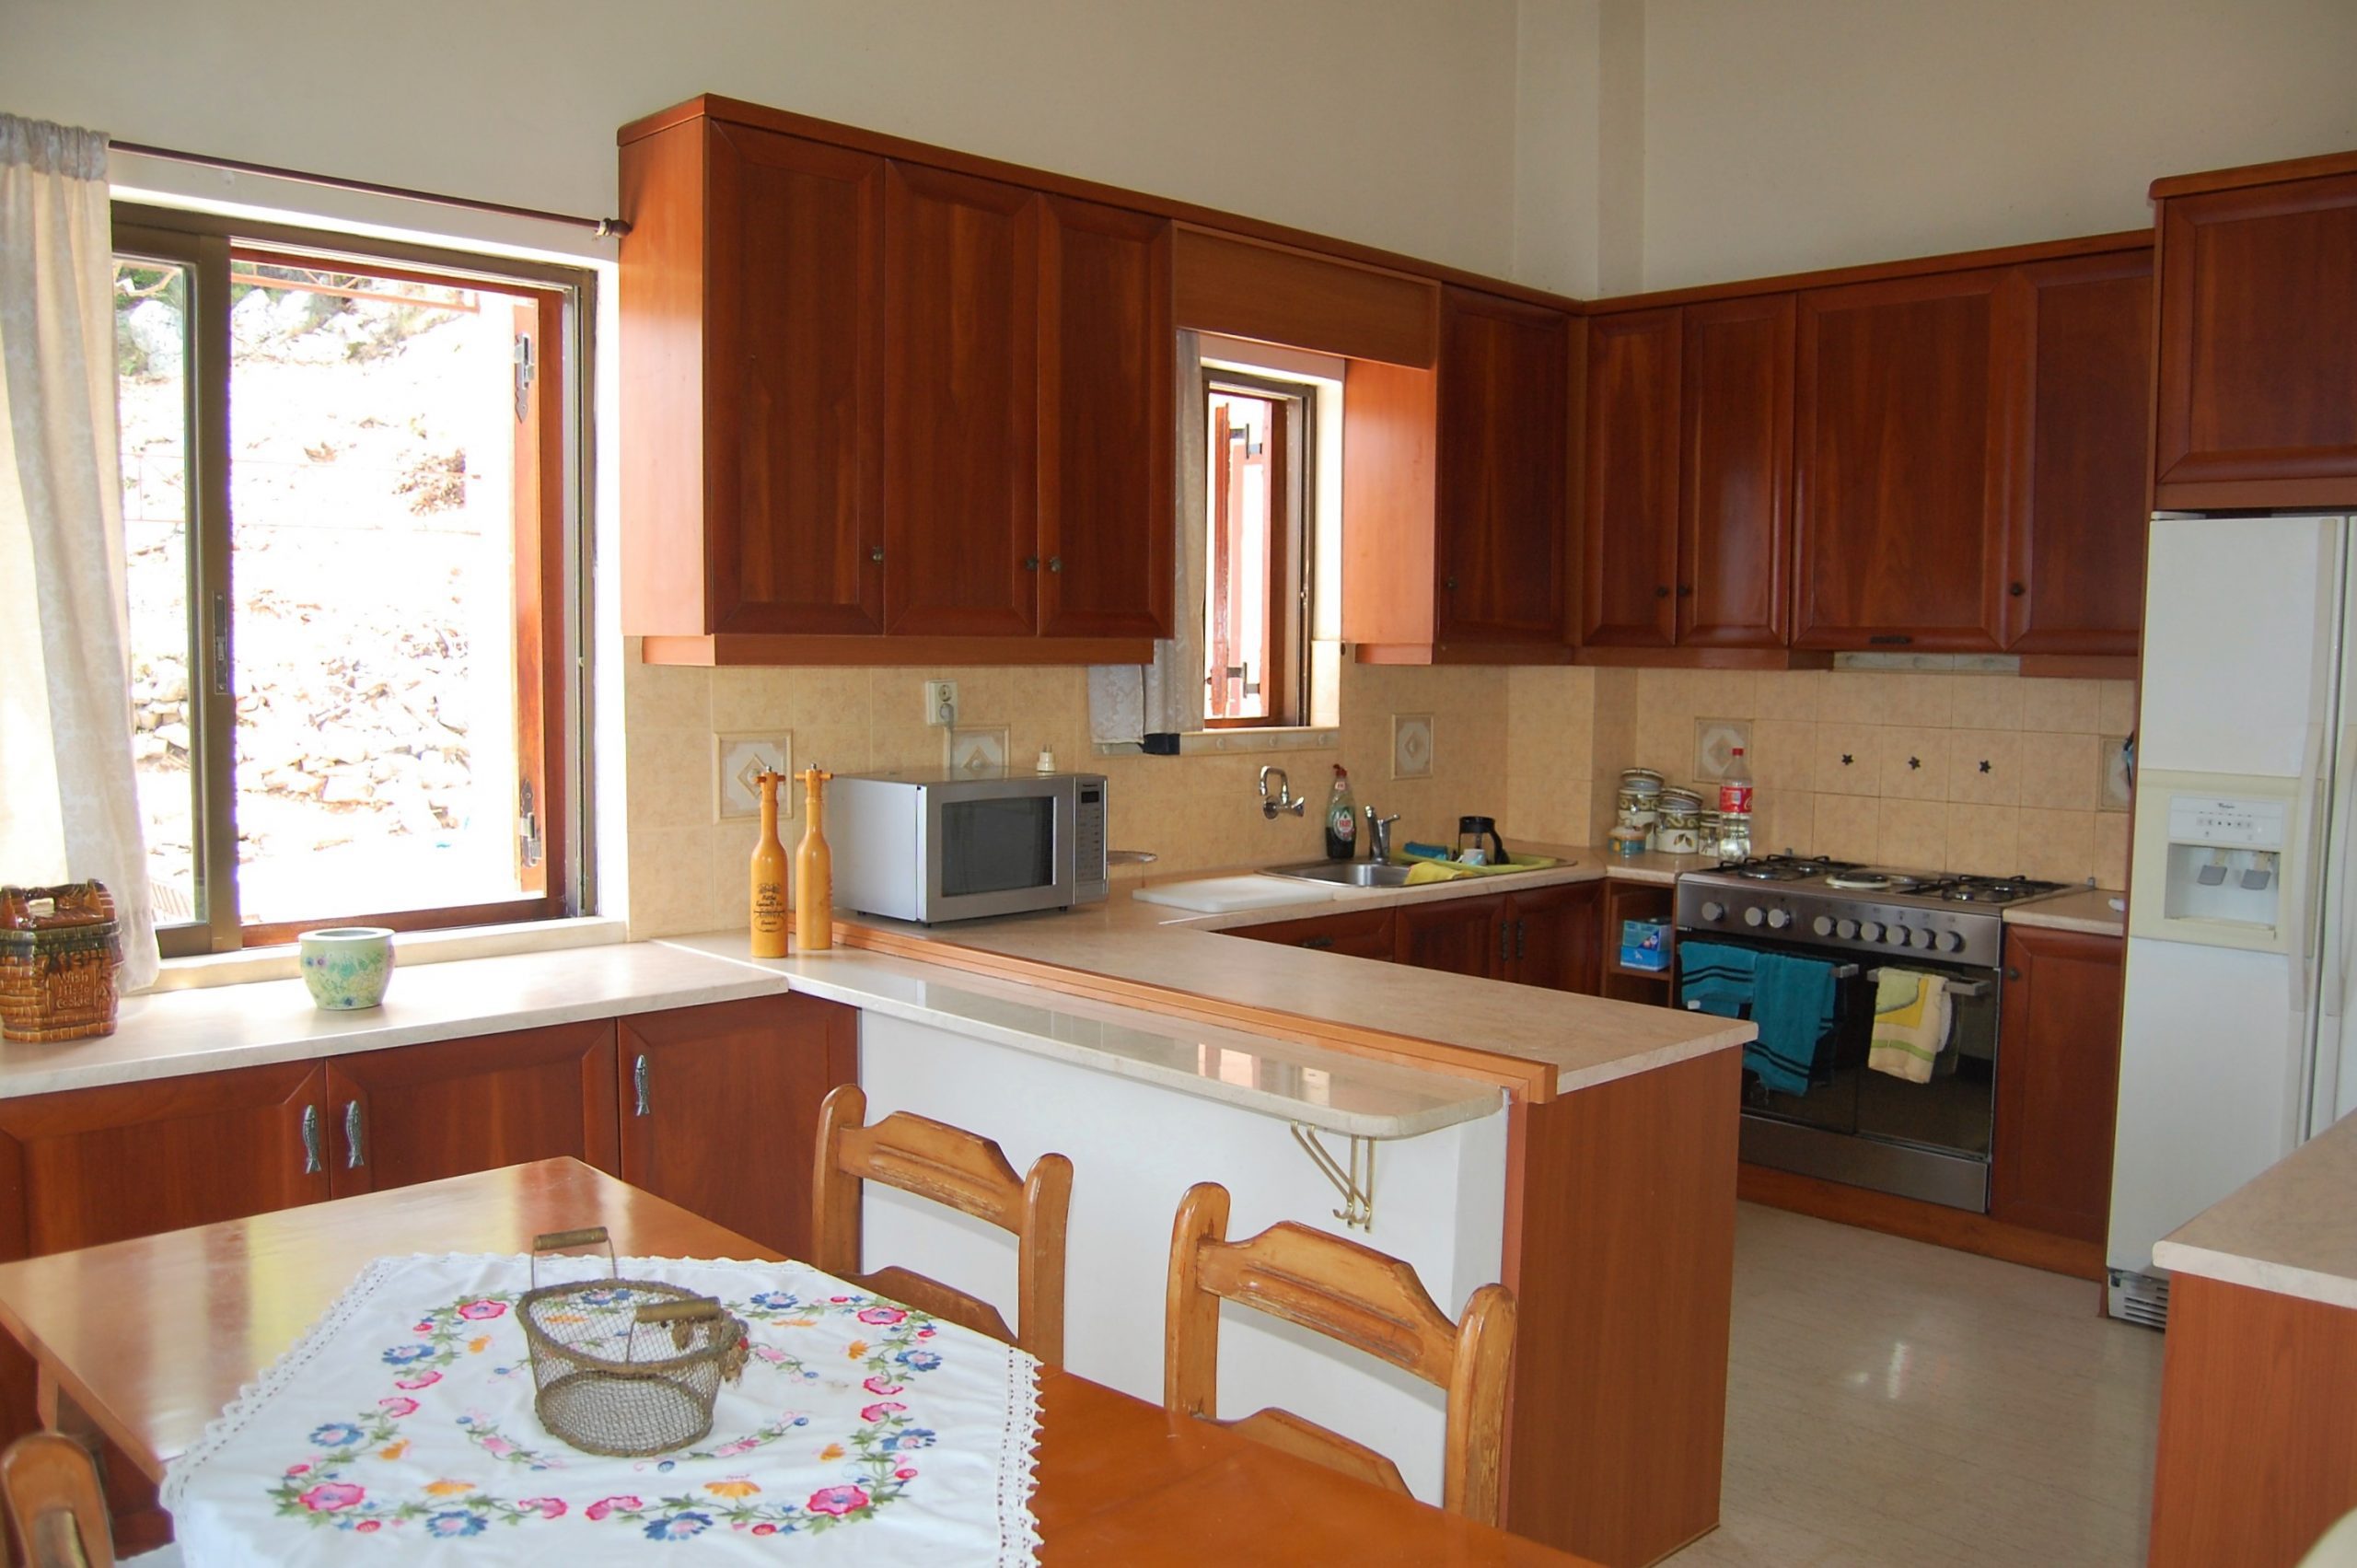 Kitchen of house for sale in Ithaca Greece, Vathi/Dexa